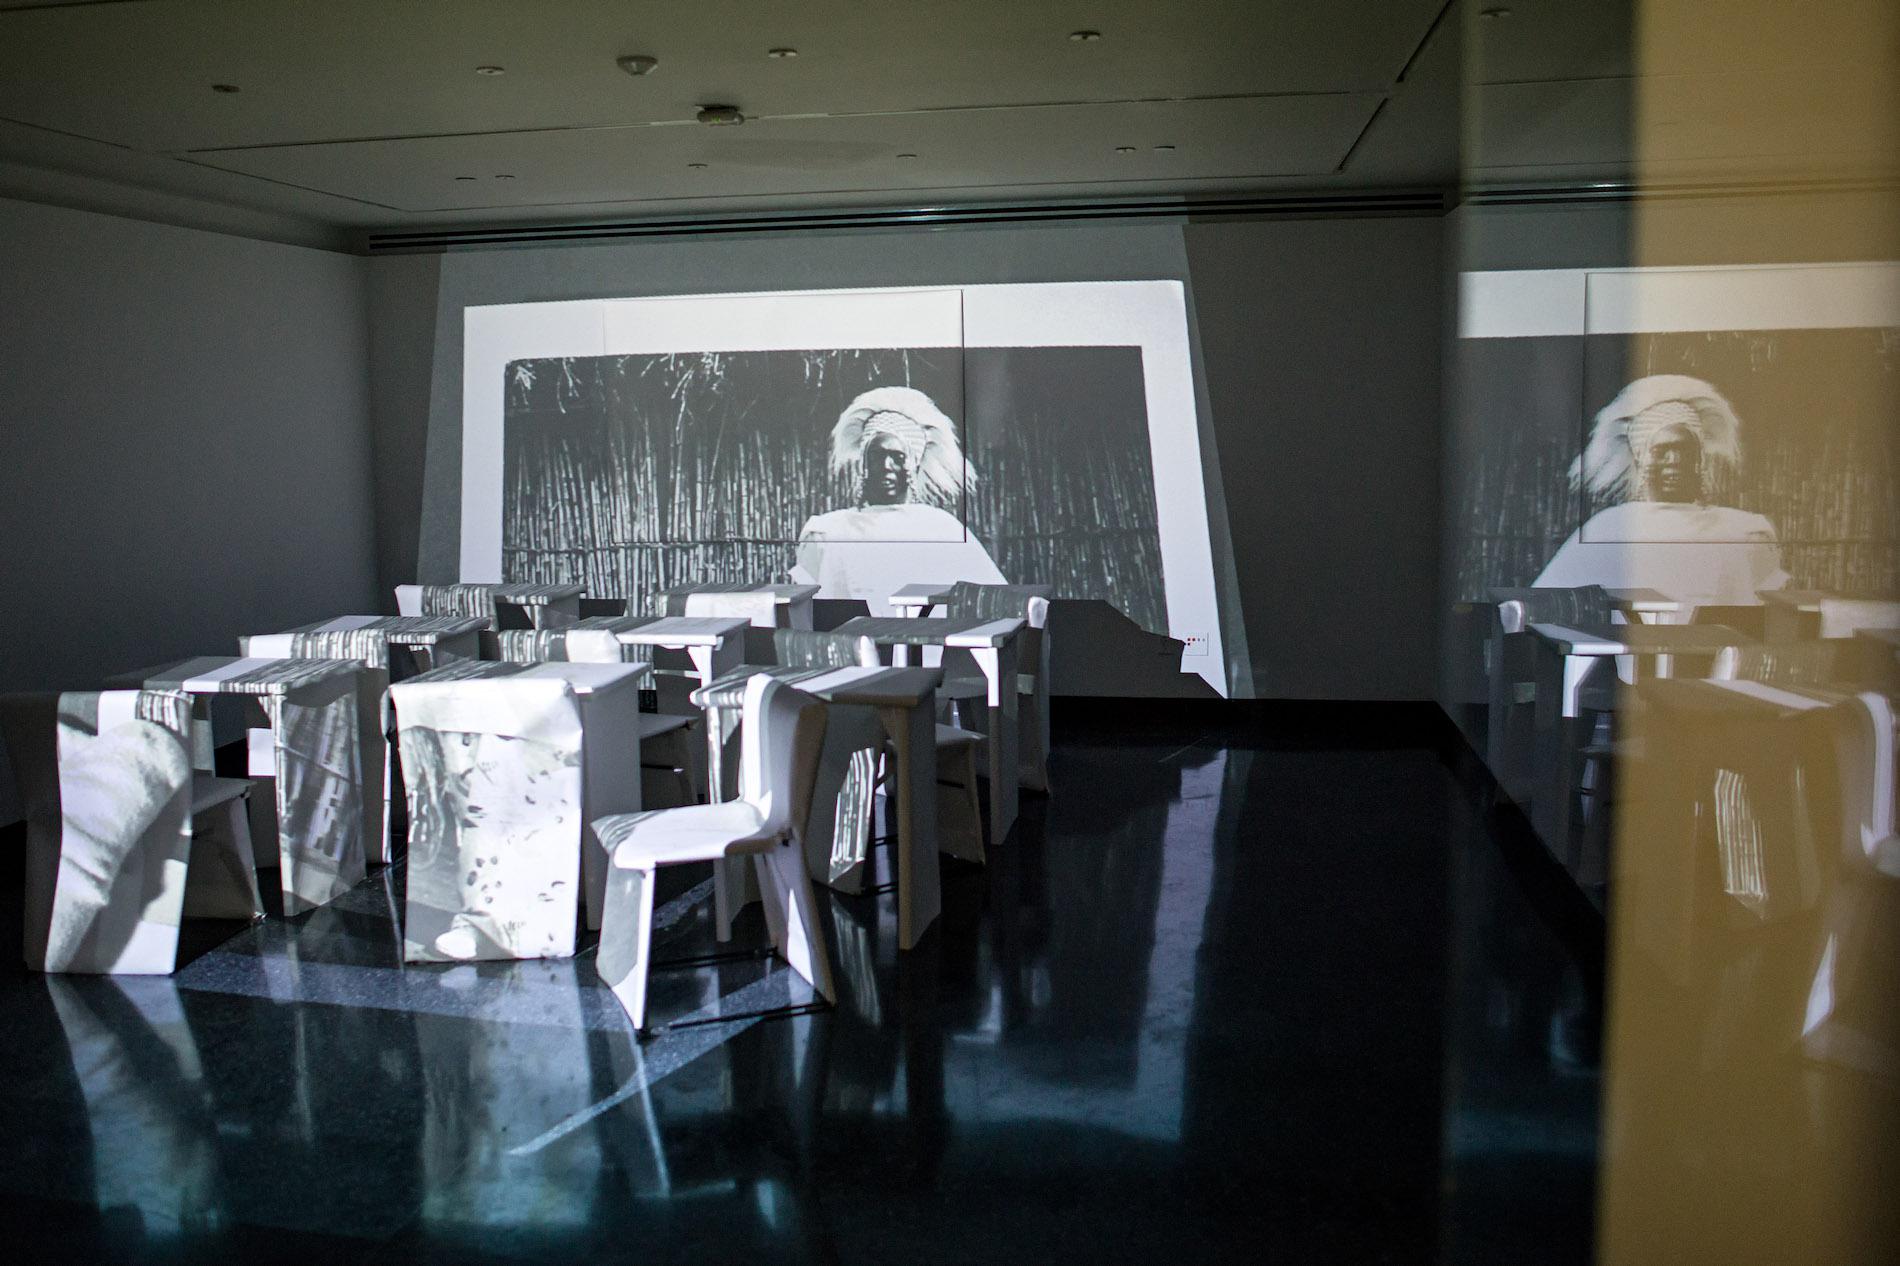 White chairs and tables in a dark room, an image projected on the wall